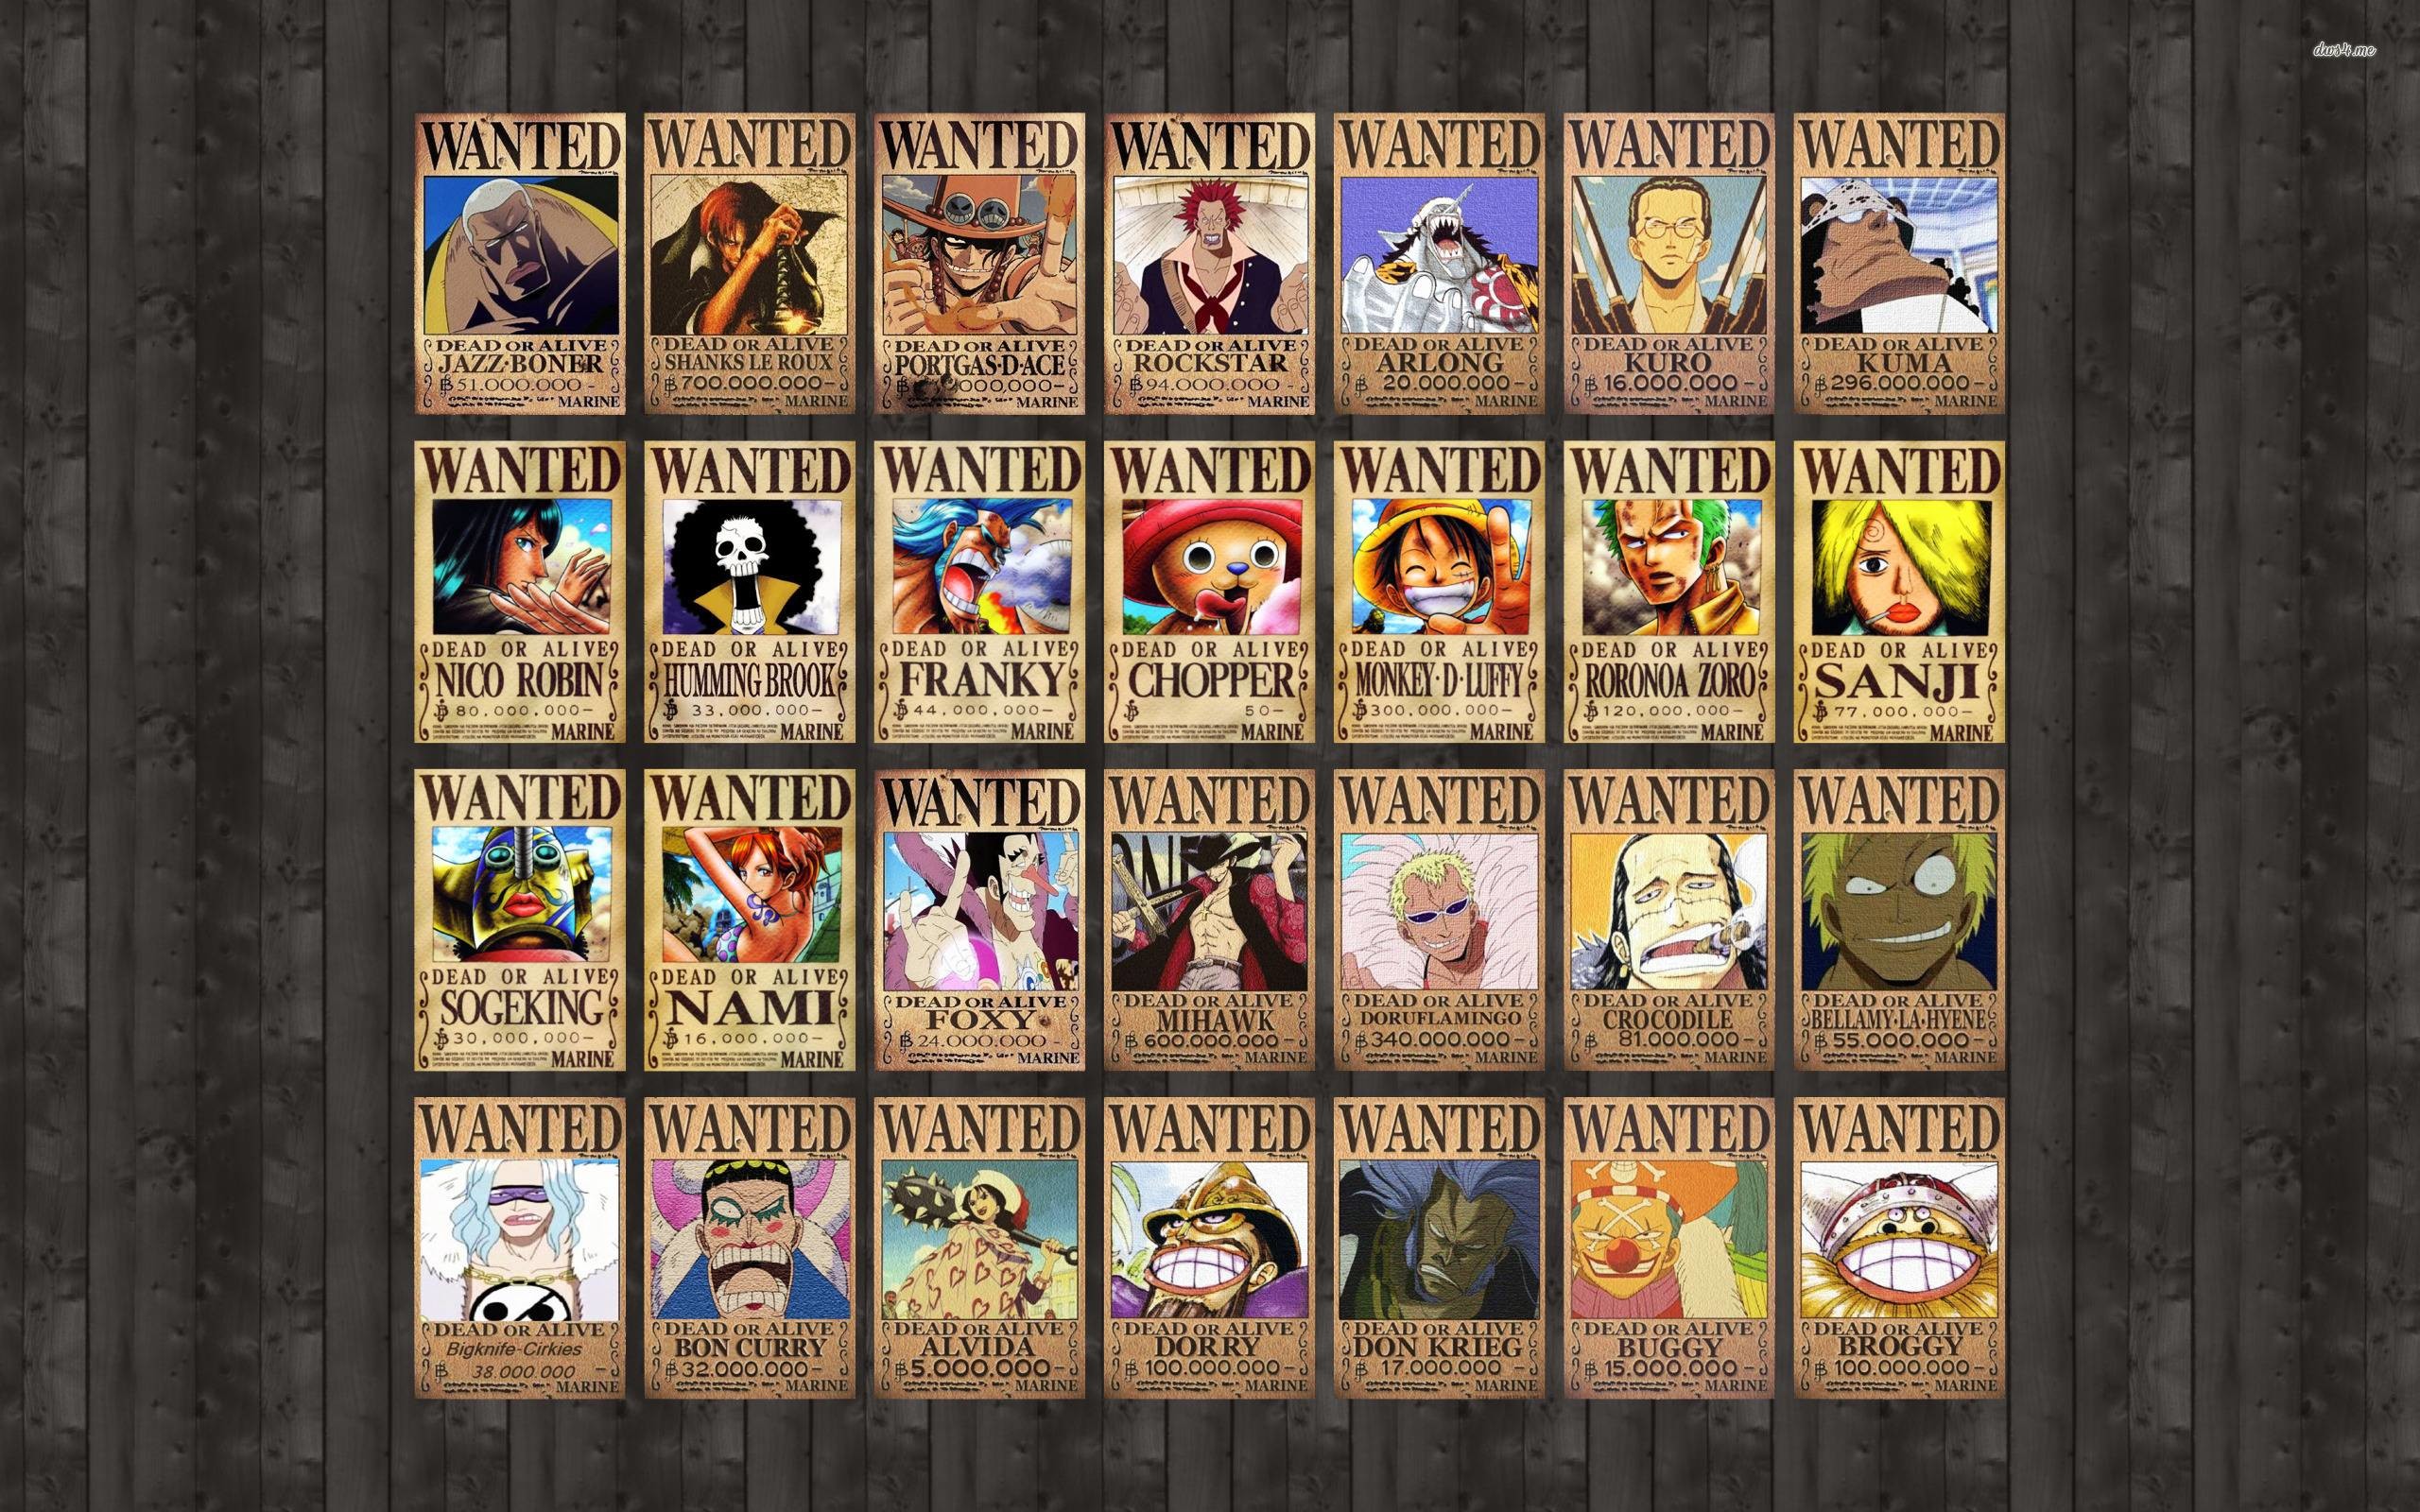 2560x1600 One Piece Wanted Posters - One Piece Wallpaper